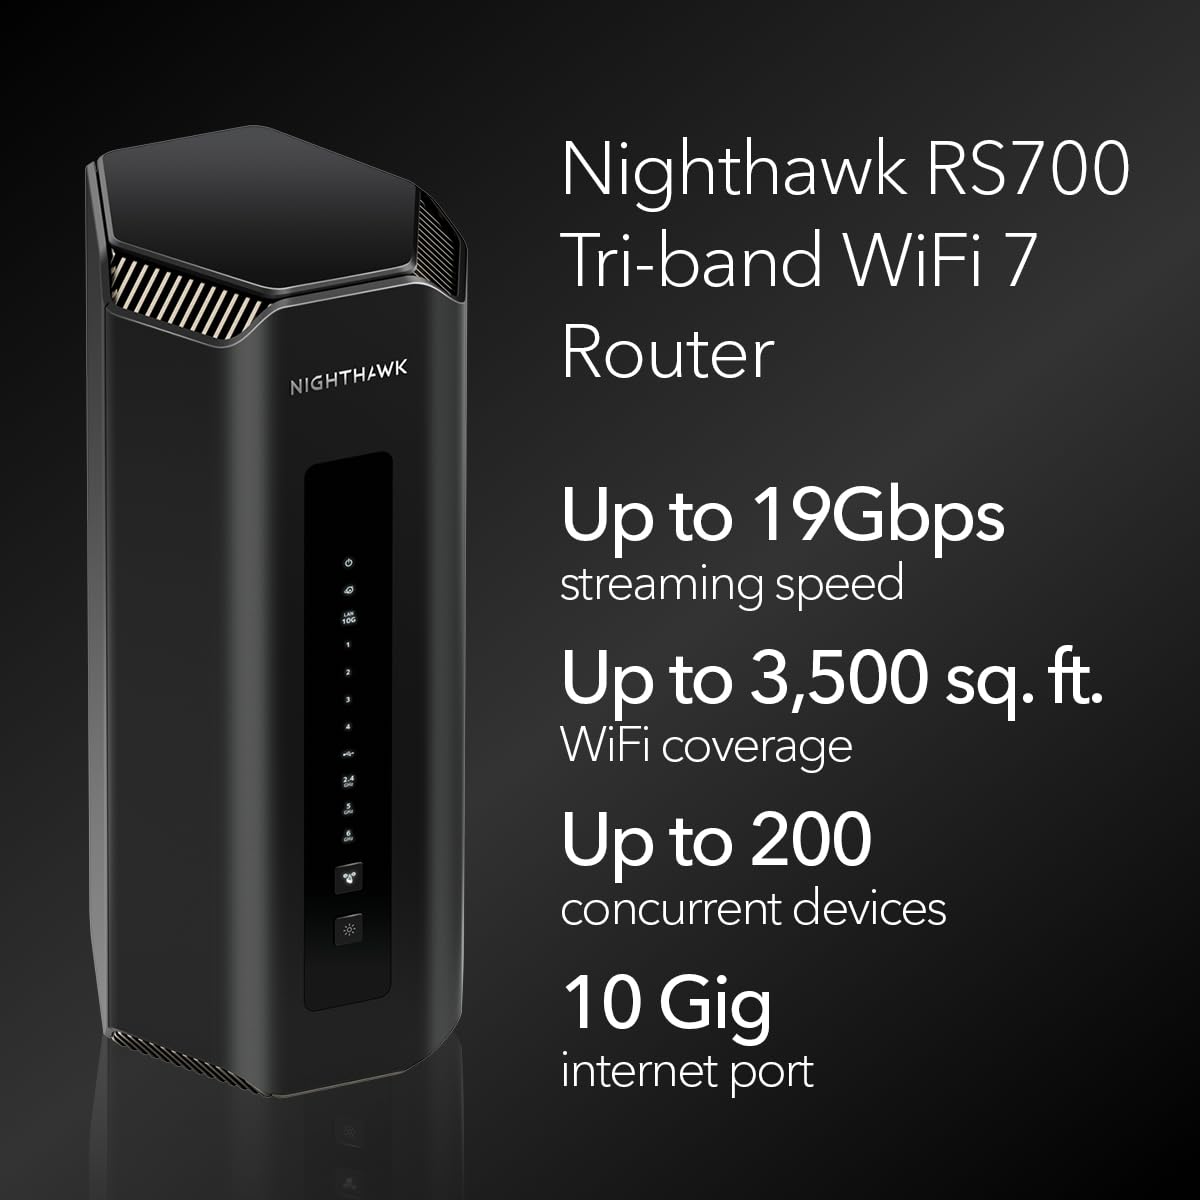 NETGEAR Nighthawk Tri-Band WiFi 7 Router (RS700S) - BE19000 Wireless Speed (Up to 19Gbps) - Coverage up to 3,500 sq. ft., 200 Devices - 10 Gig Internet Port – 1-Year Armor Subscription Included